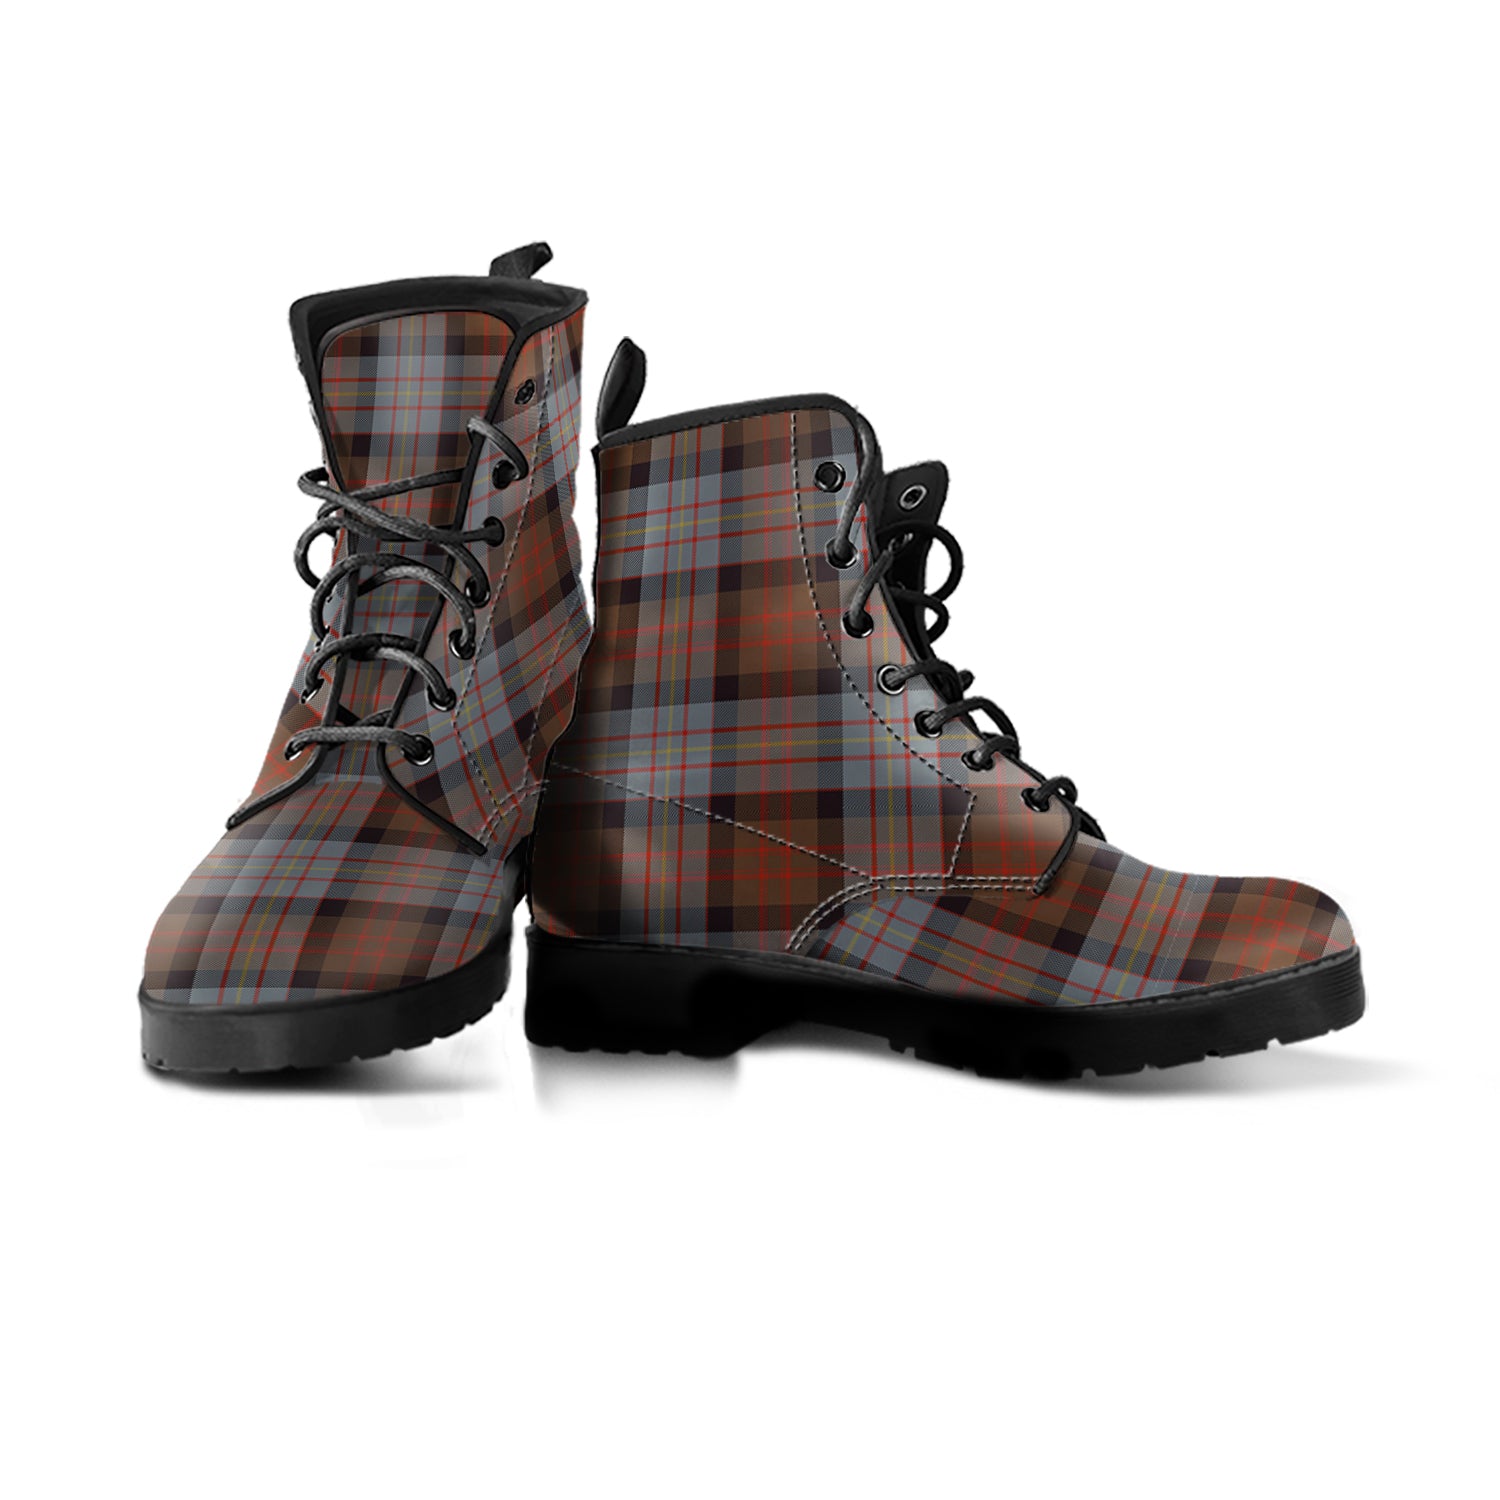 cameron-of-erracht-weathered-tartan-leather-boots